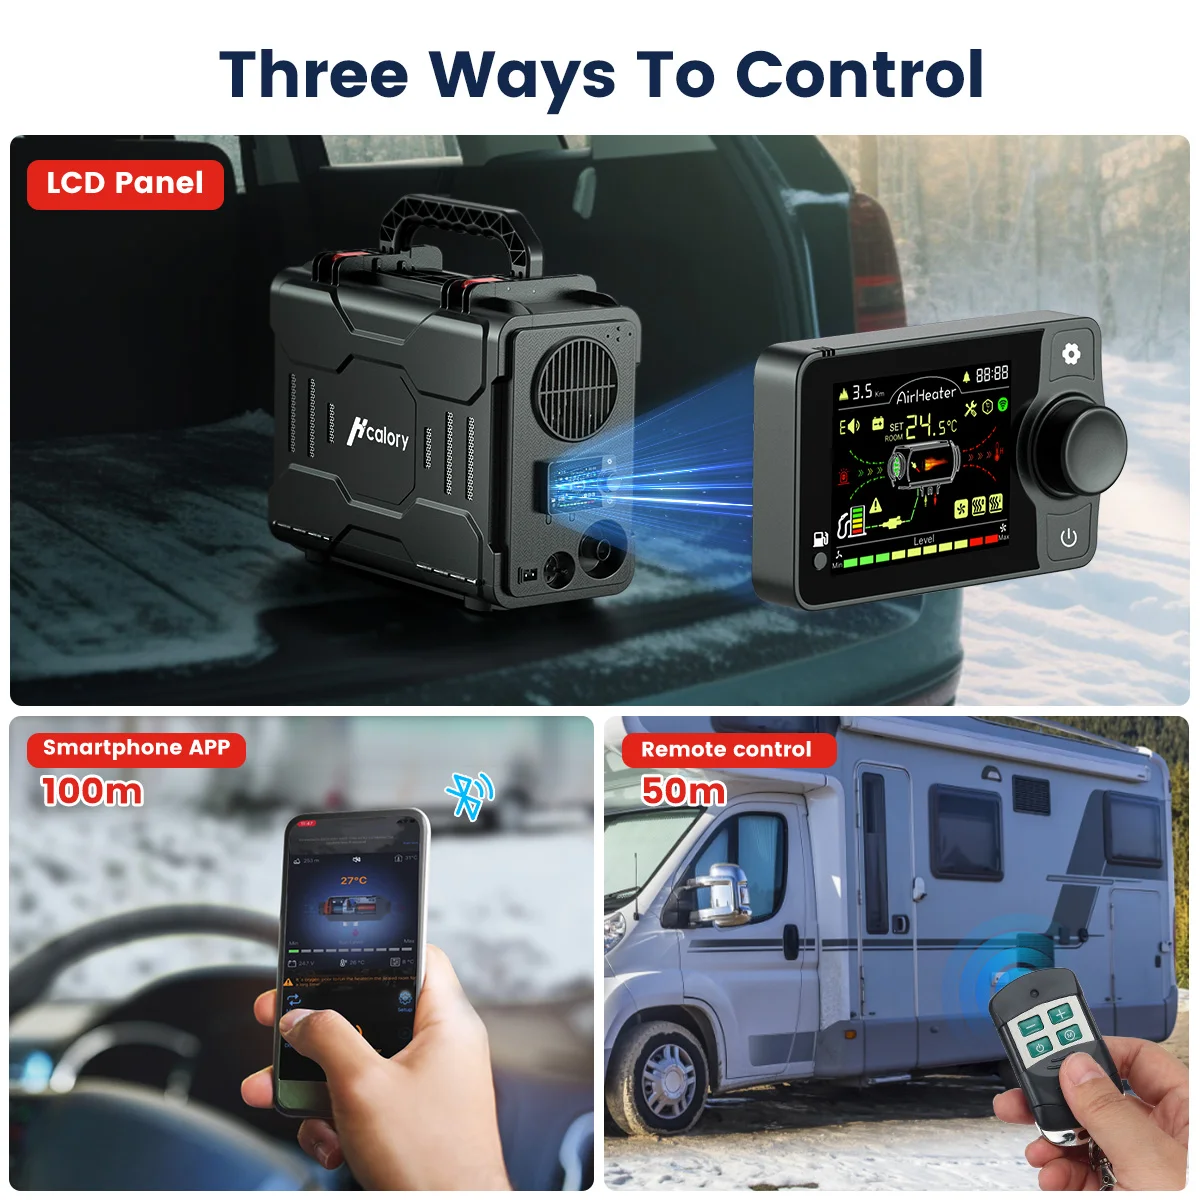 Hcalory 2022 NEW Diesel Air Heater 12V 5KW Adjustable bluetooth App Remote  Control Integrated Parking Heater Machine For Car RV - AliExpress